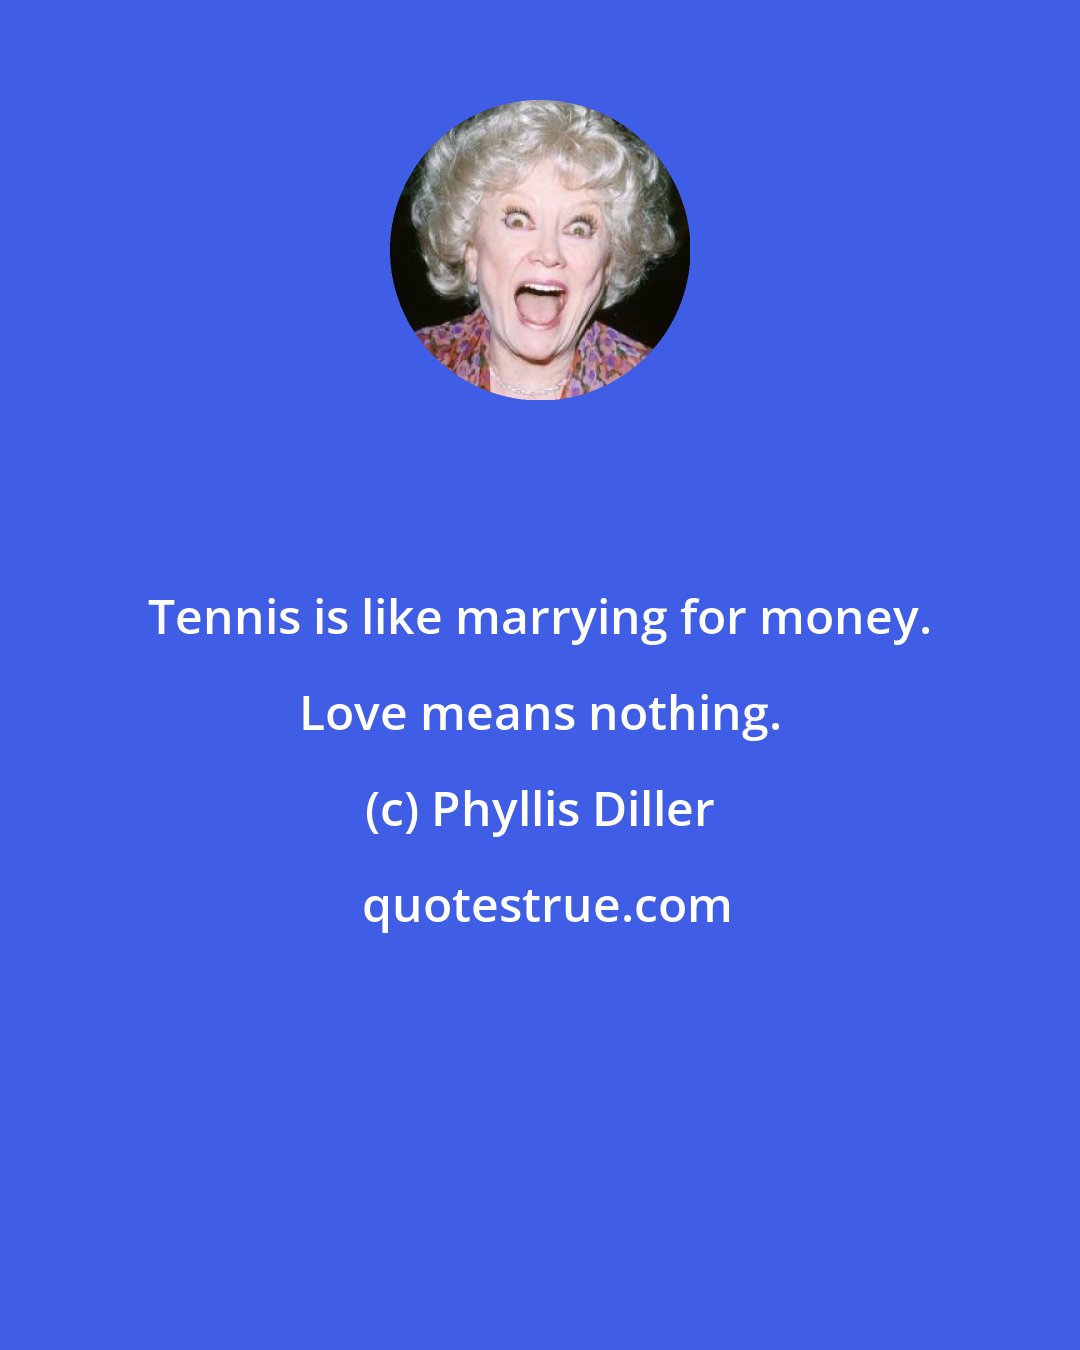 Phyllis Diller: Tennis is like marrying for money. Love means nothing.